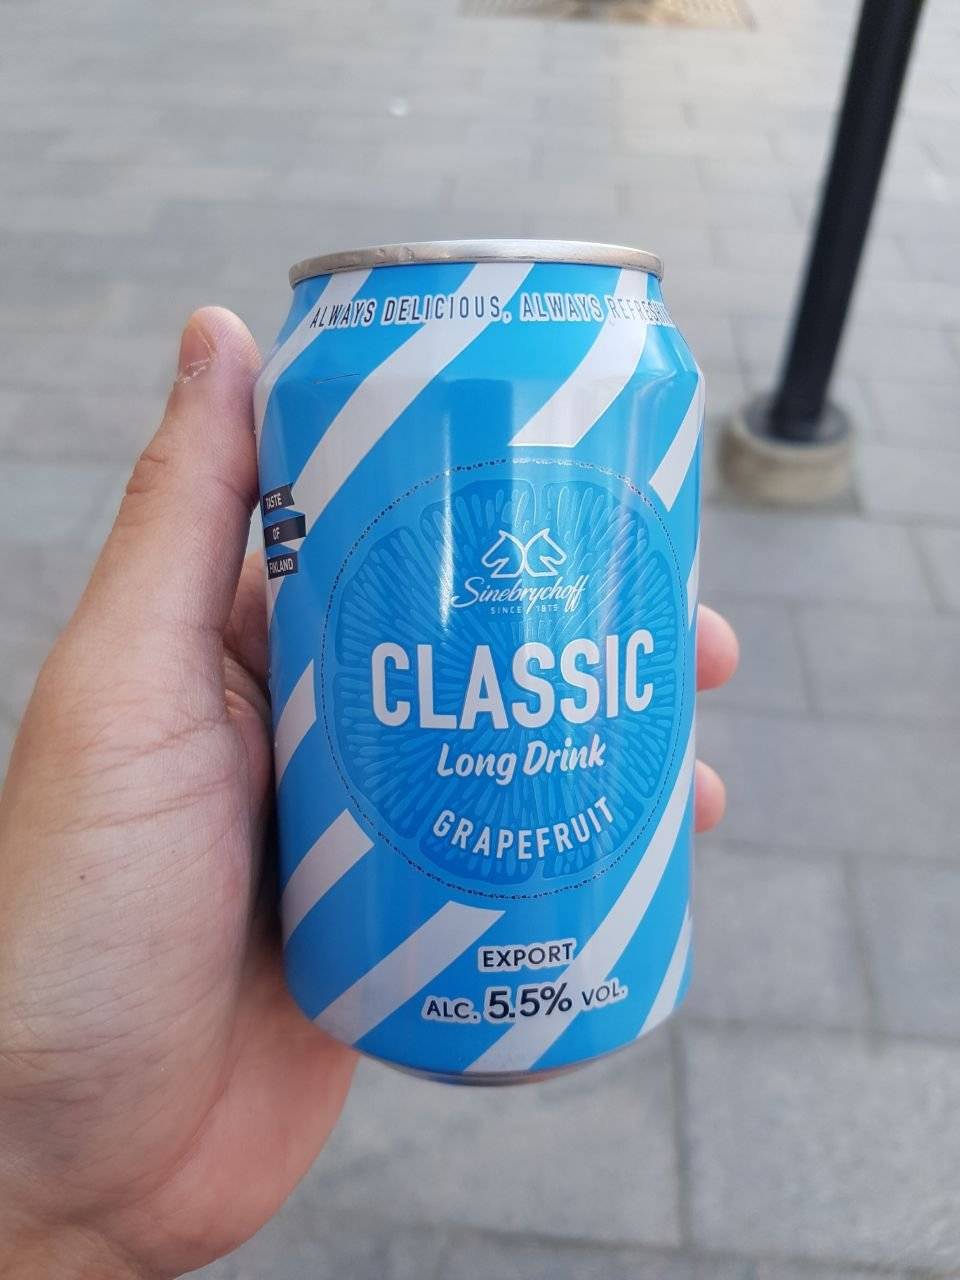 Image result for classic long drink finland steemit